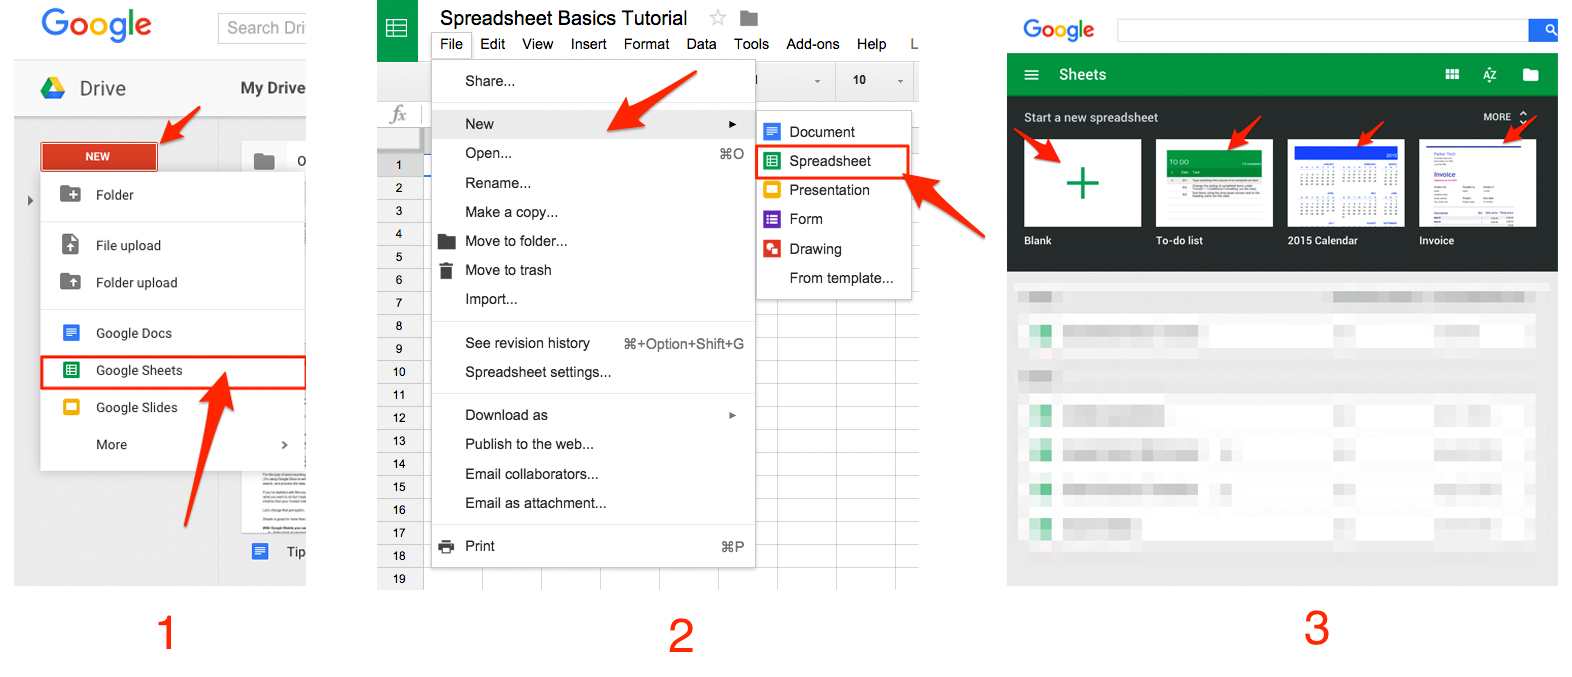 How To Create An Excel Spreadsheet For Dummies Throughout Google Sheets 101: The Beginner's Guide To Online Spreadsheets  The